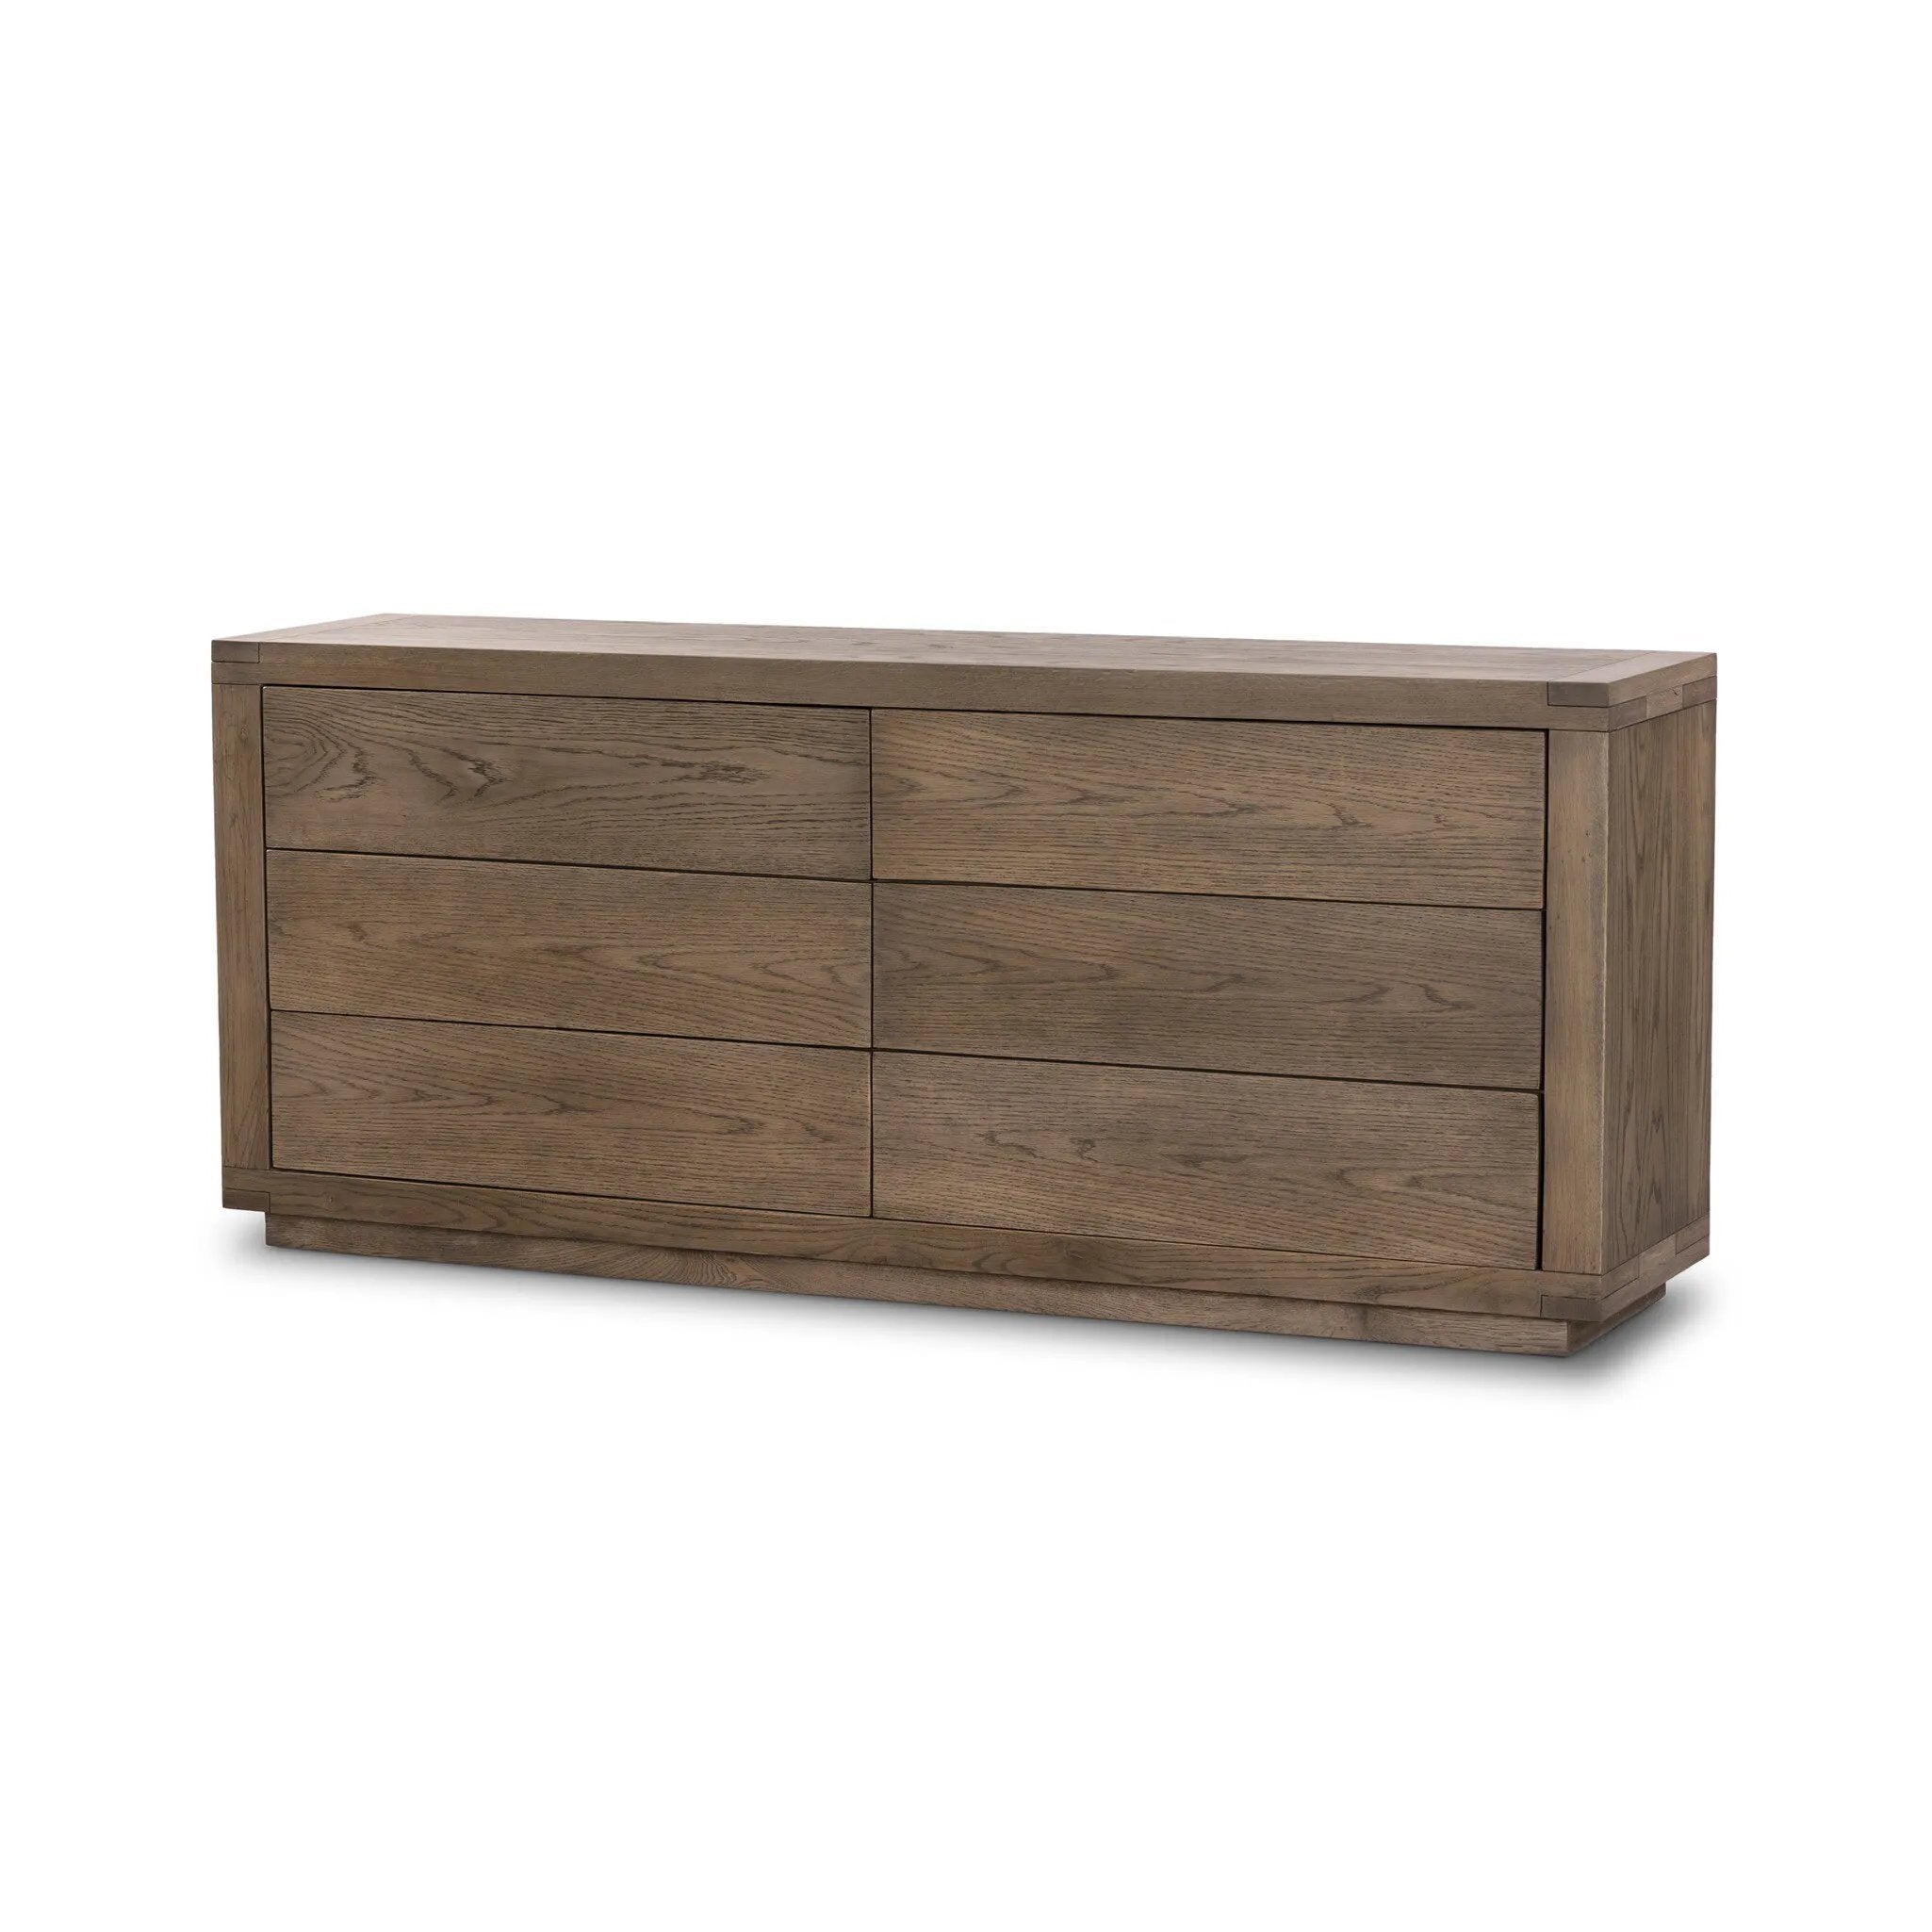 Worn oak shapes a streamlined box-style dresser, with lap joint corners for a detail-driven touch.Collection: Bennet Amethyst Home provides interior design, new home construction design consulting, vintage area rugs, and lighting in the Houston metro area.